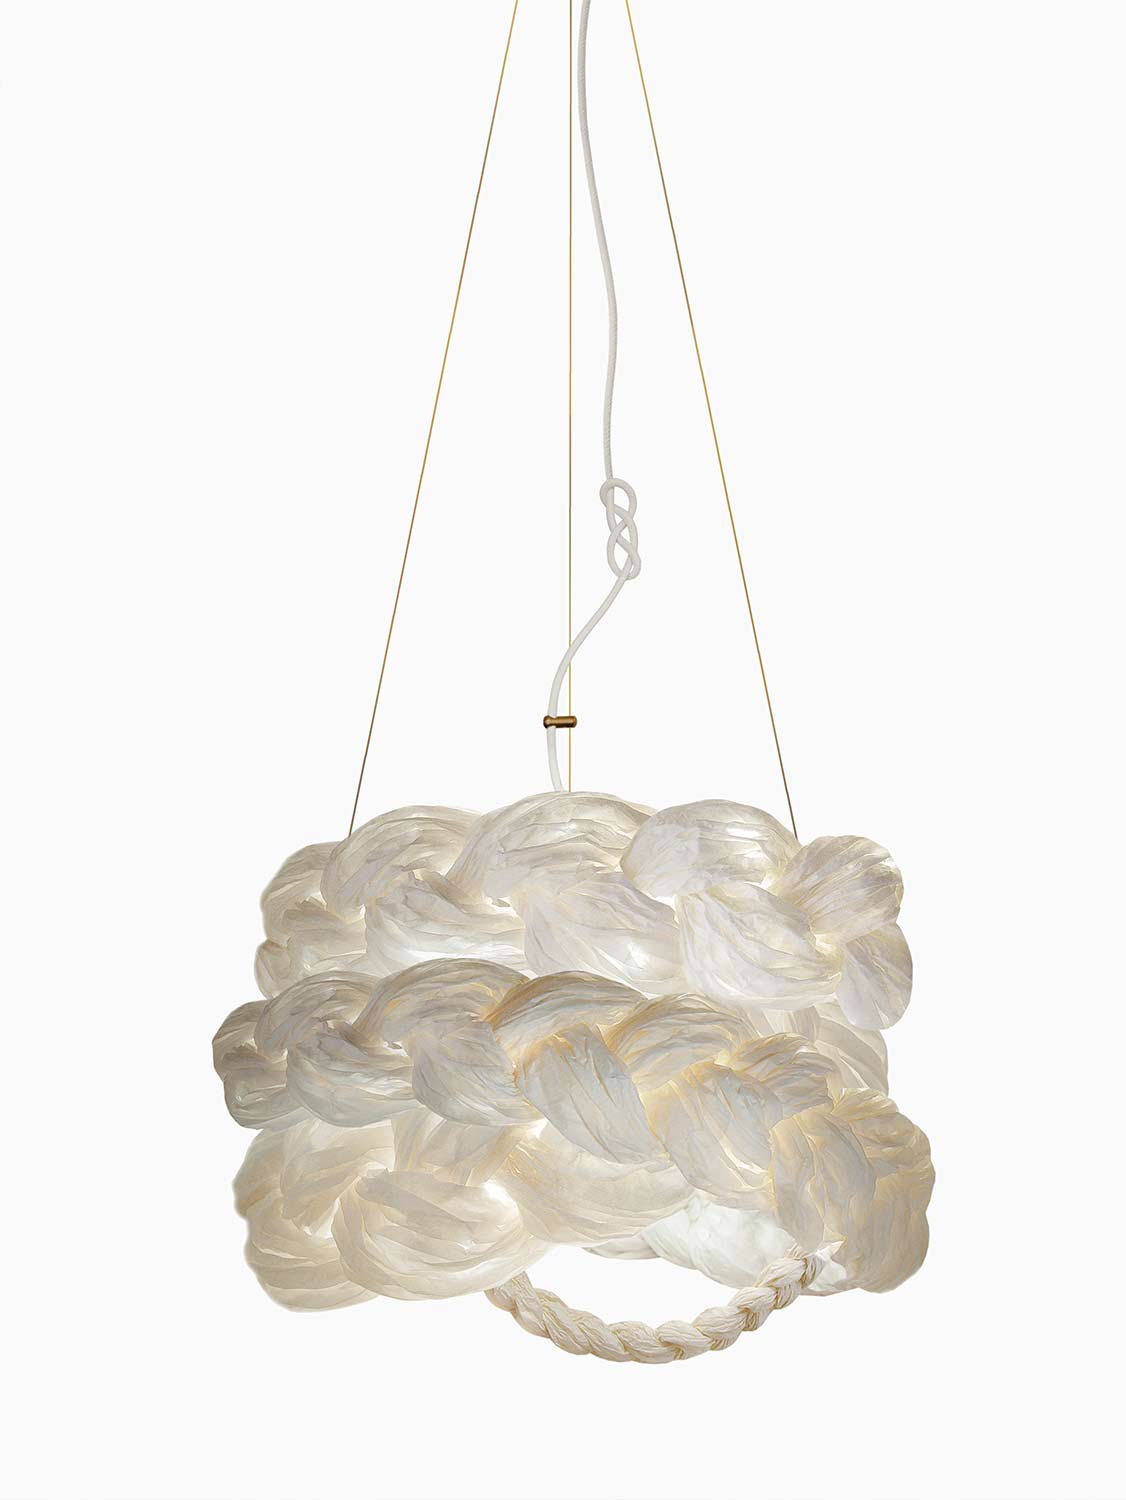 White Paper Braided Unique Handmade Pendant Lamp | Cozy Atmosphere Lighting | Contemporary Natural Lighting for Living room,  Bedroom & Lobby | Sustainable Design Lighting | baby & kids room lighting | White interior | mammalampa The Bride suspension lamp M